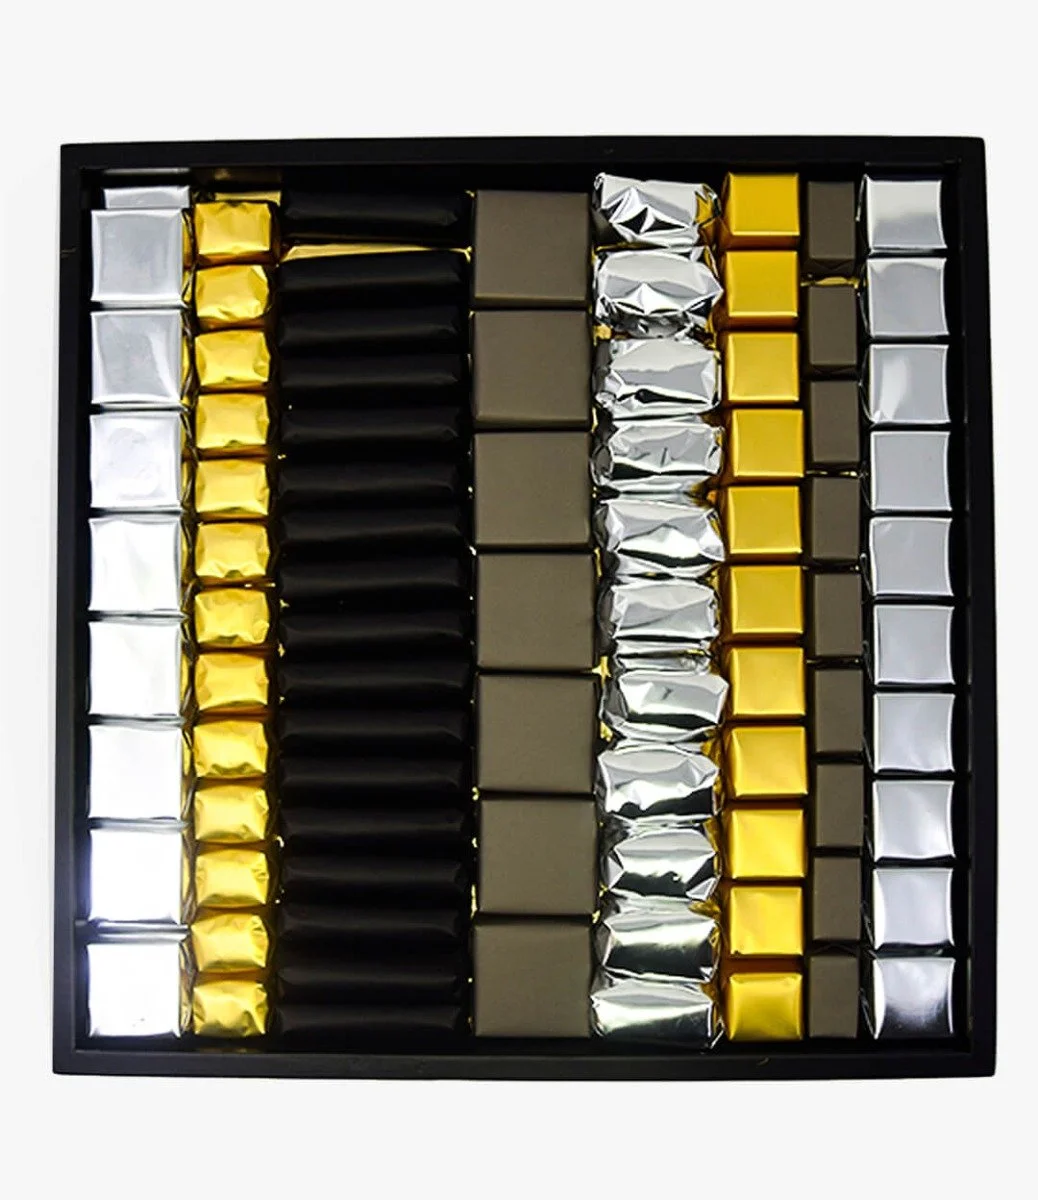 The Ultimate - Large Gold Assorted Luxury Chocolate Gift